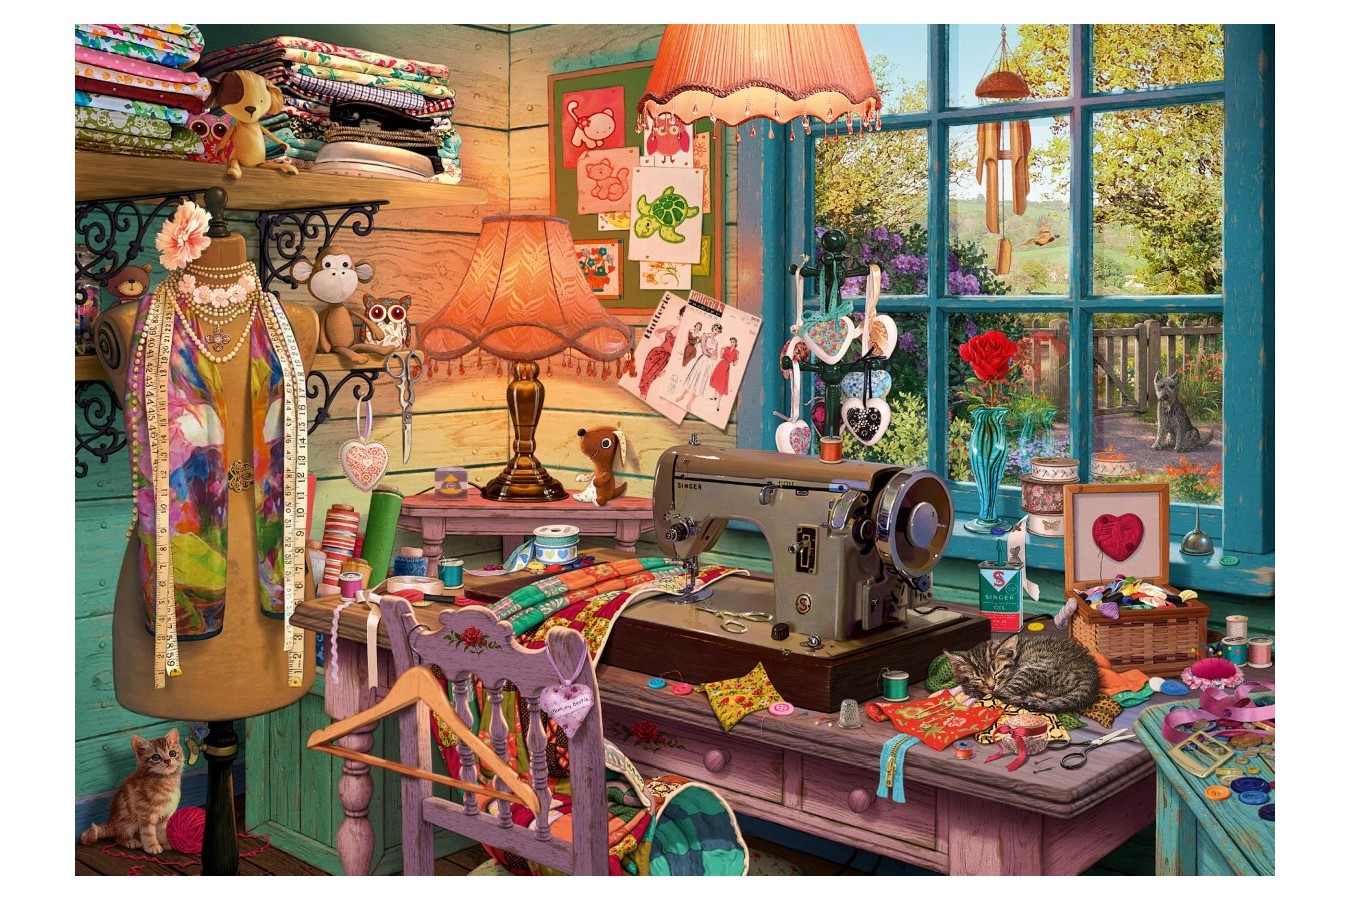 Puzzle Schmidt - Steve Read: In The Sewing Room, 1000 piese (59654)